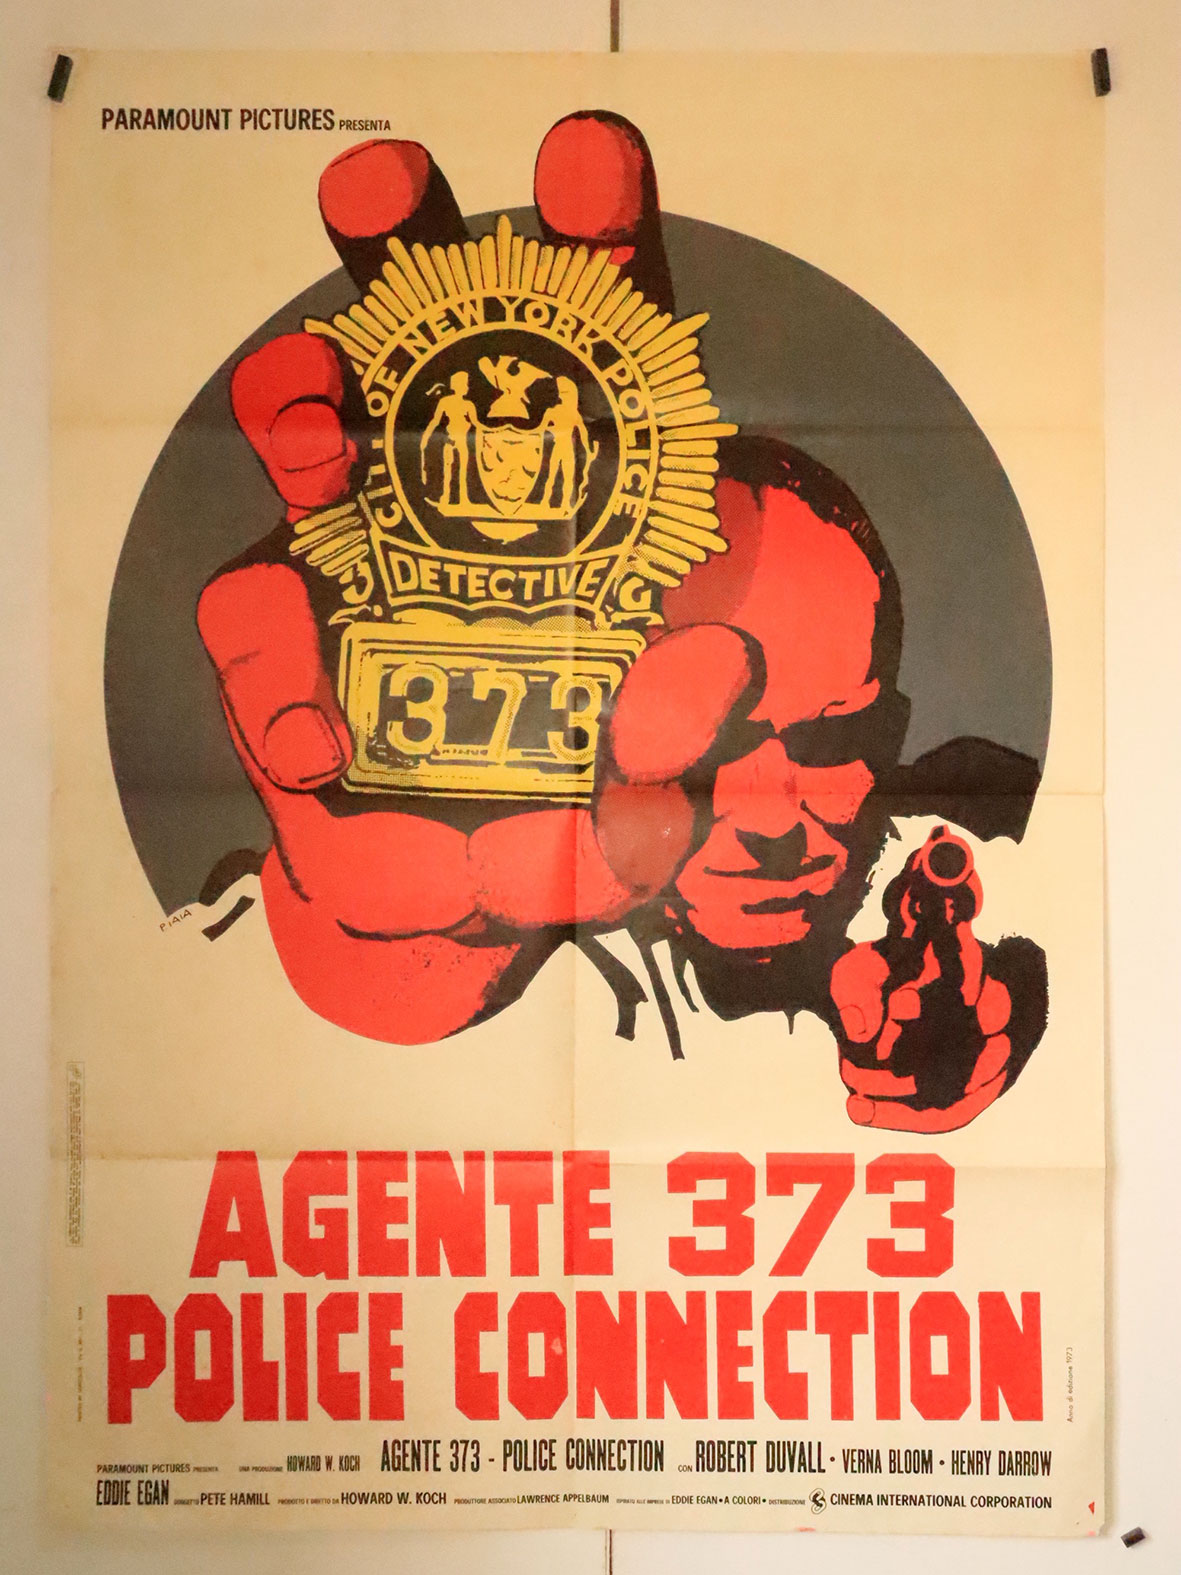 AGENTE 373 POLICE CONNECTION